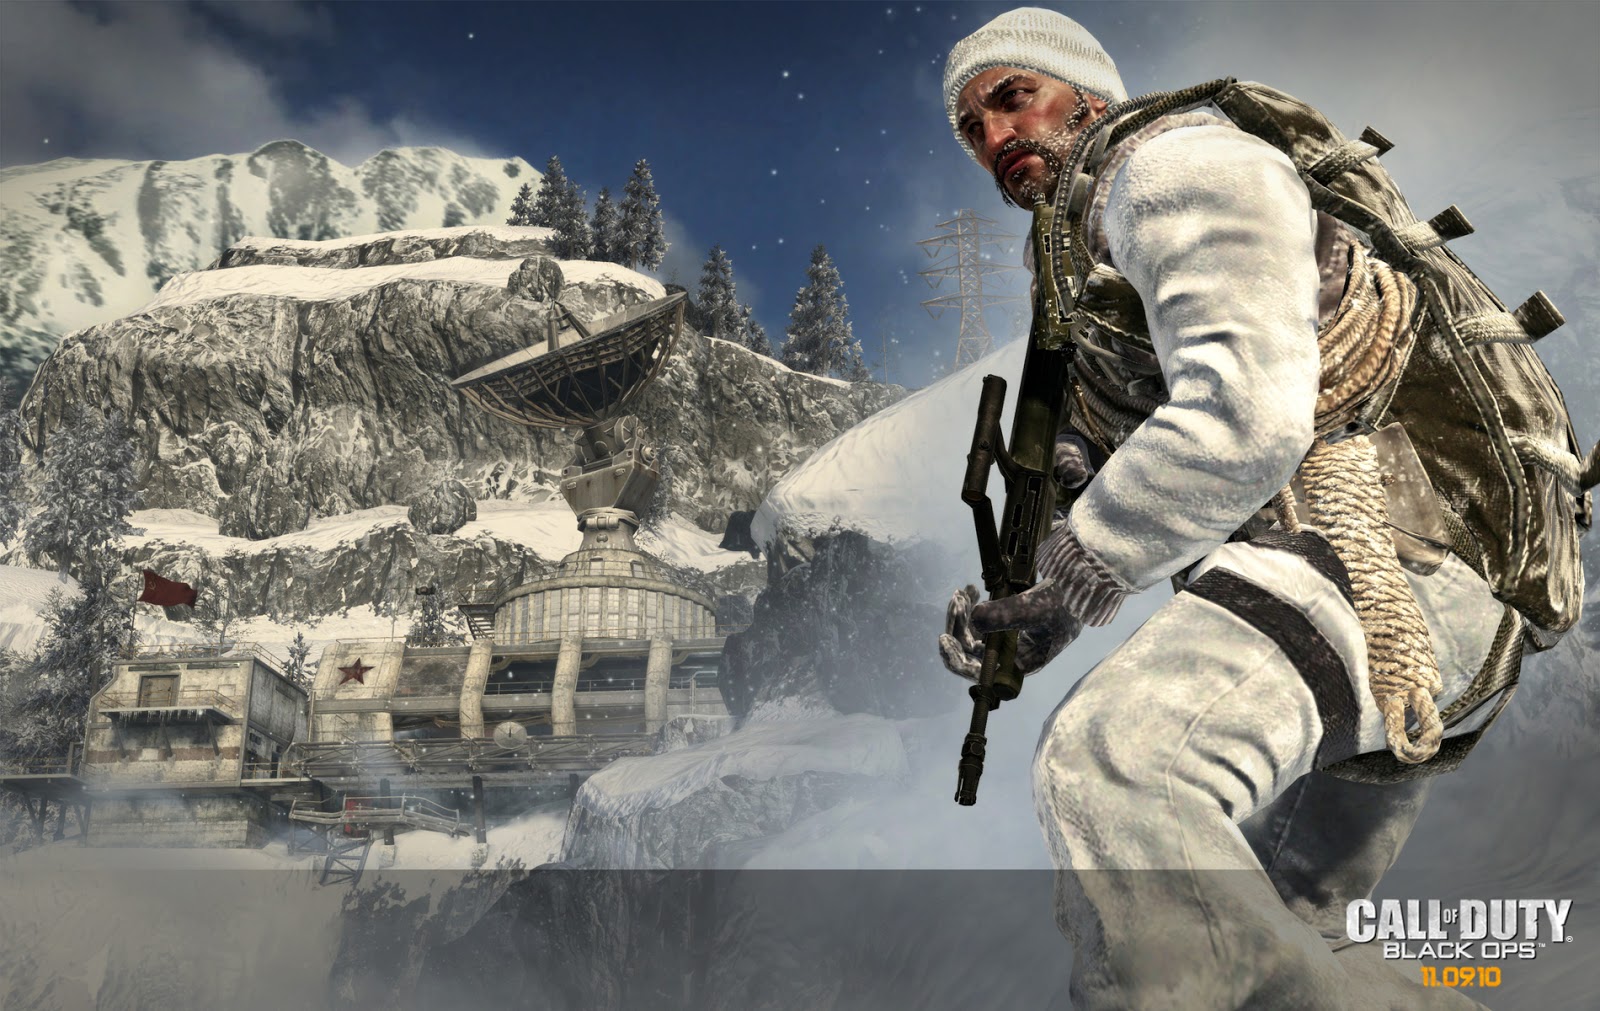 HD WALLPAPERS Call of Duty Black Ops HD Wallpapers 1600x1011